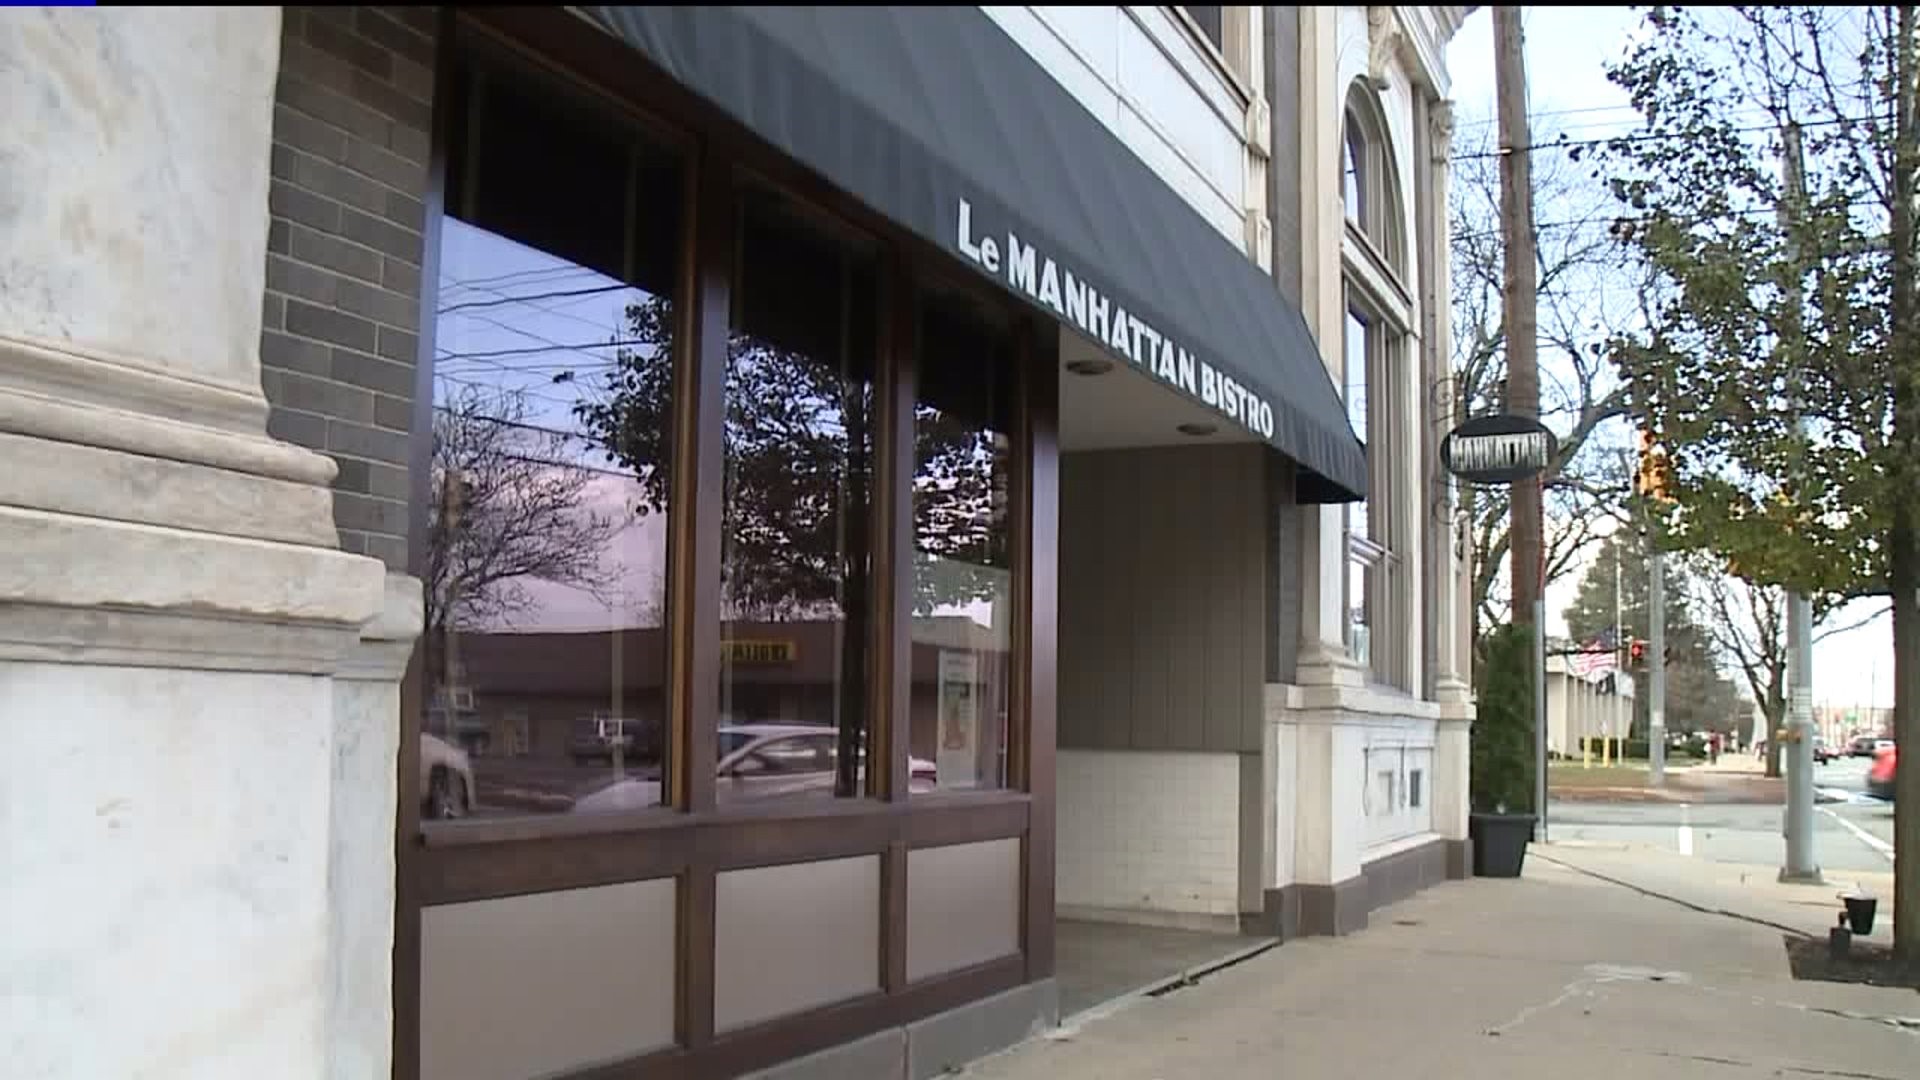 Le Manhattan Bistro Owner Evicted